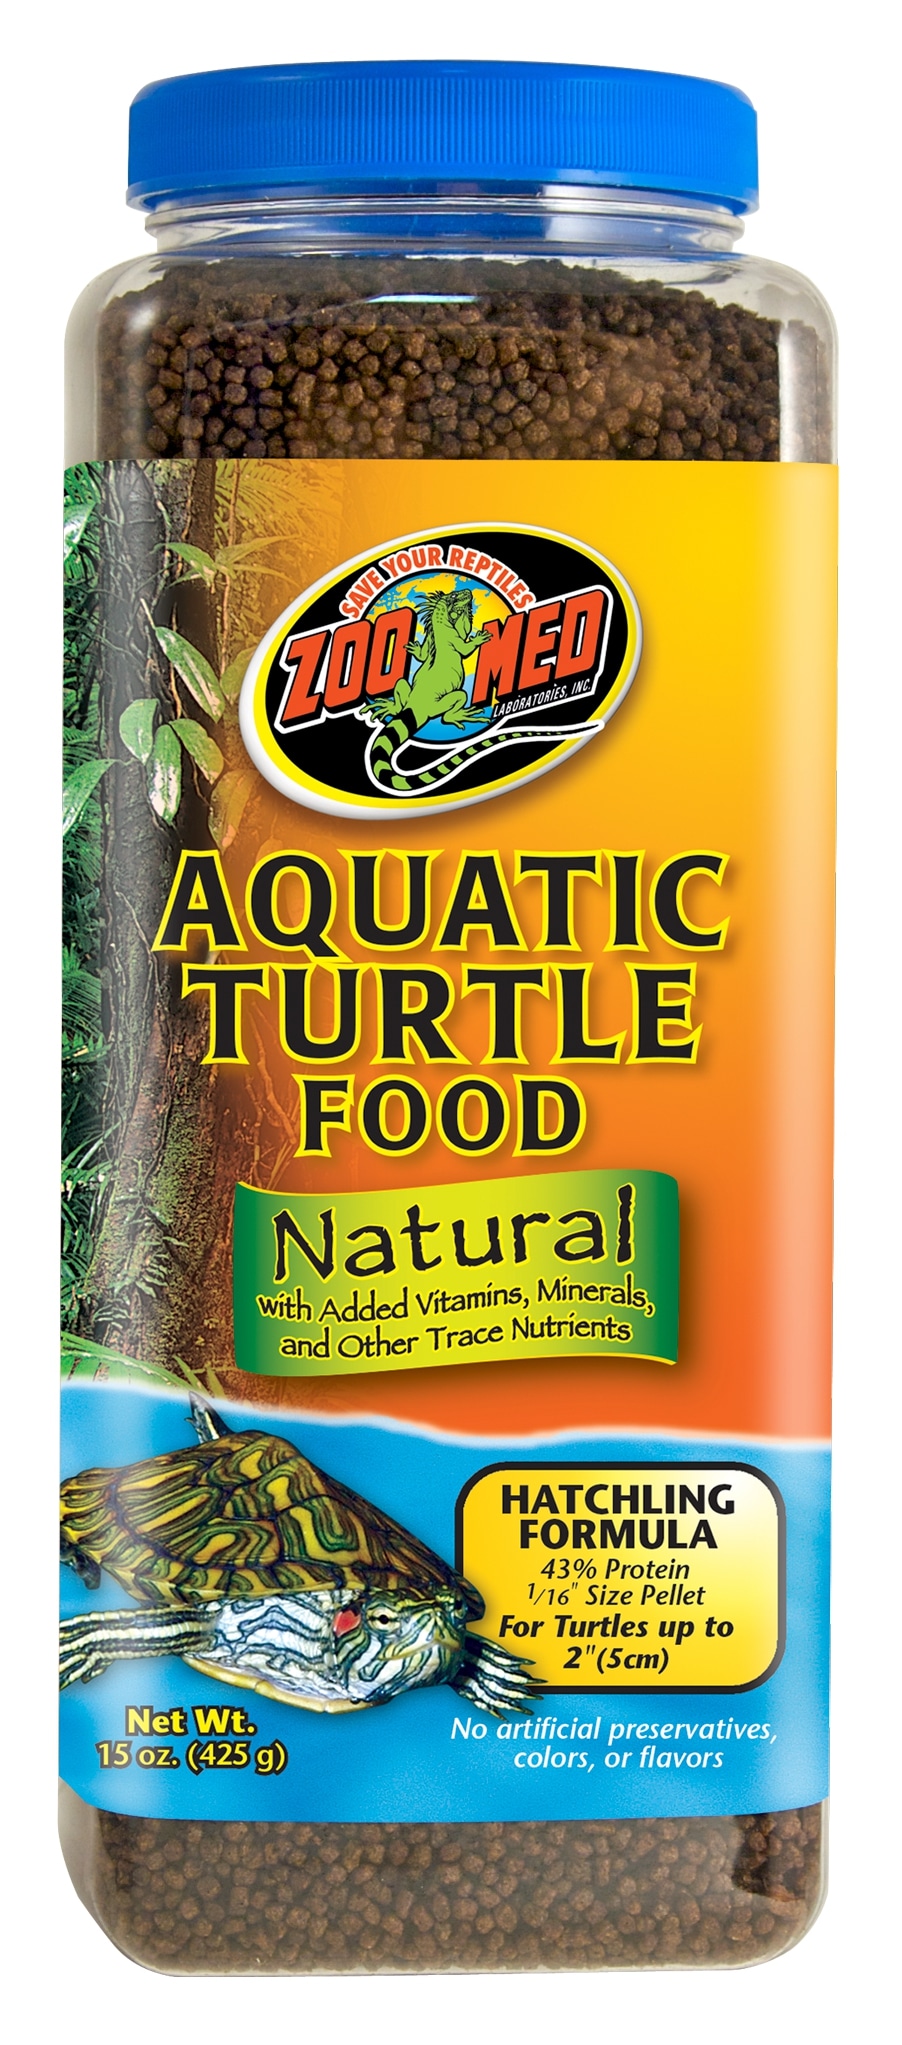 Aquatic Turtle Food Growth 38% Protein FLOATING 18 Pound Bulk Bag FREE SHIPPING 